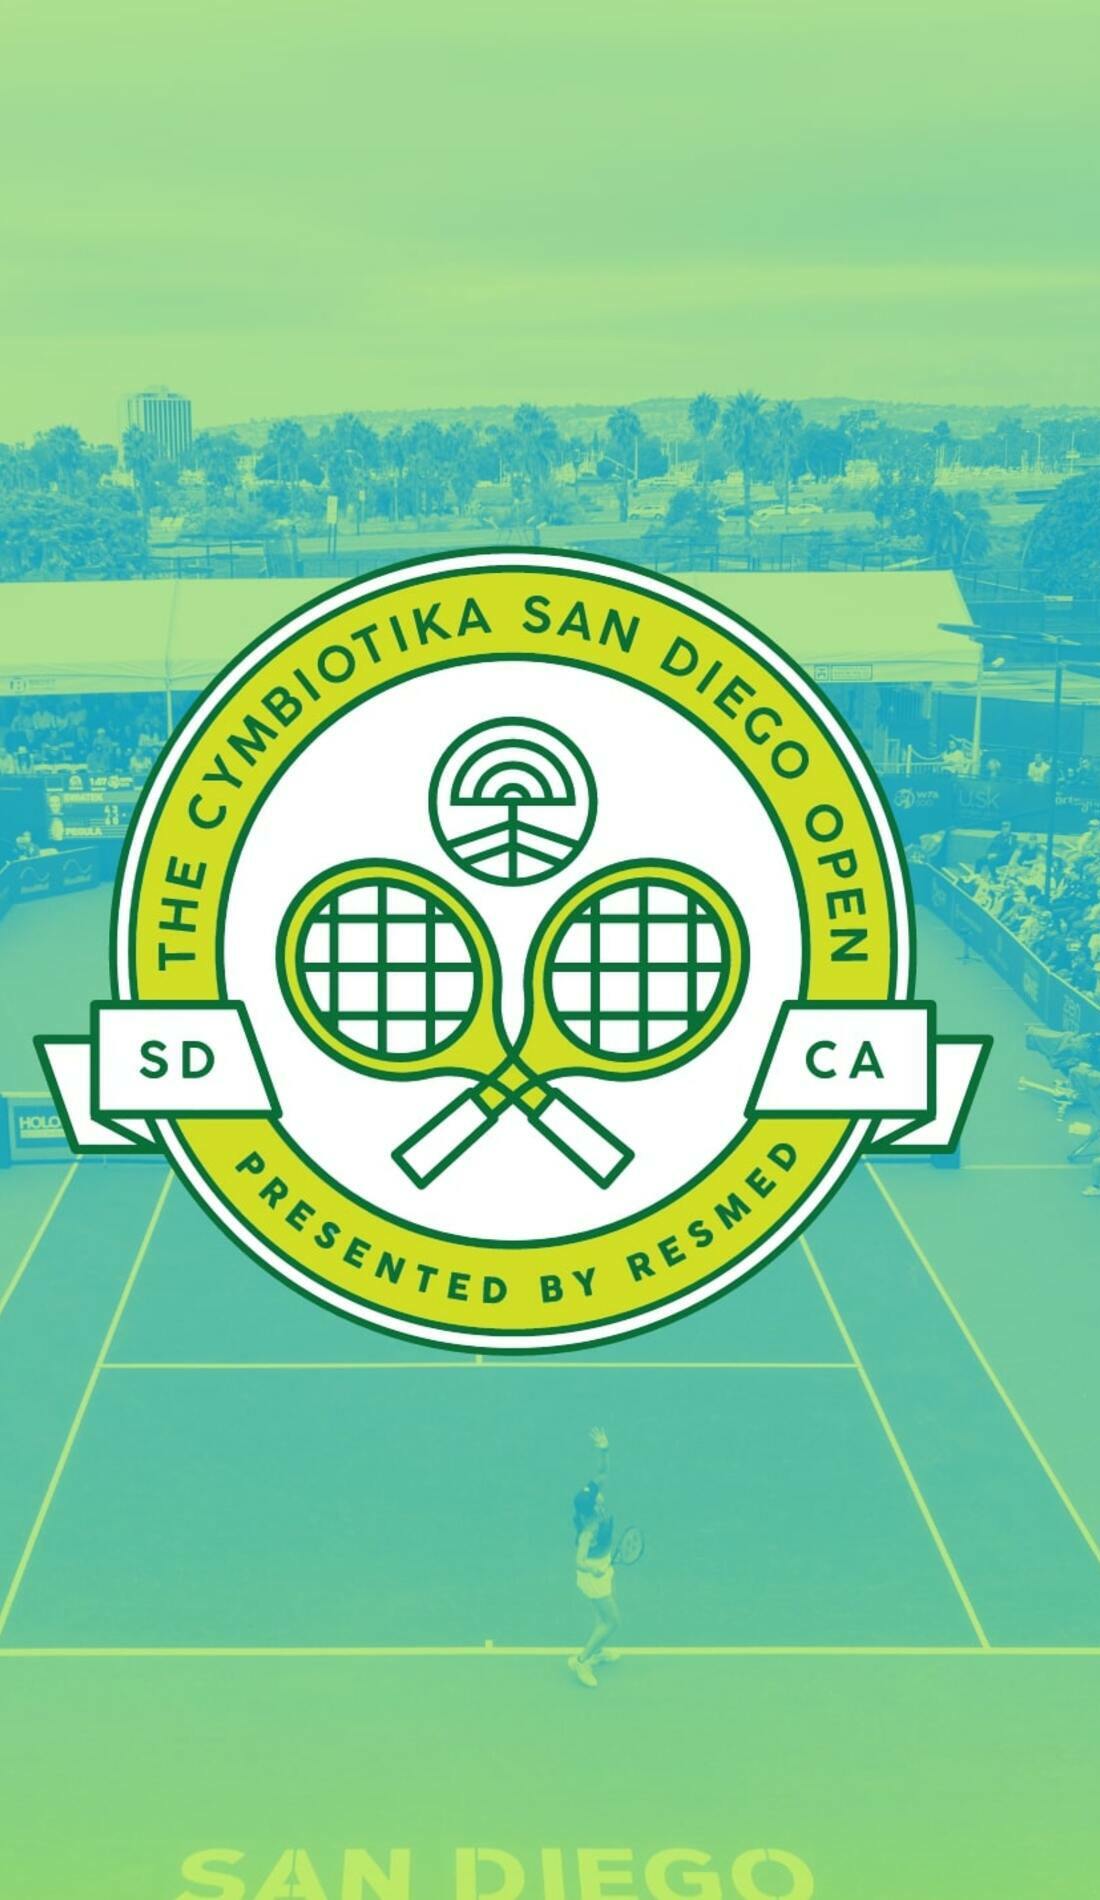 A San Diego Open live event